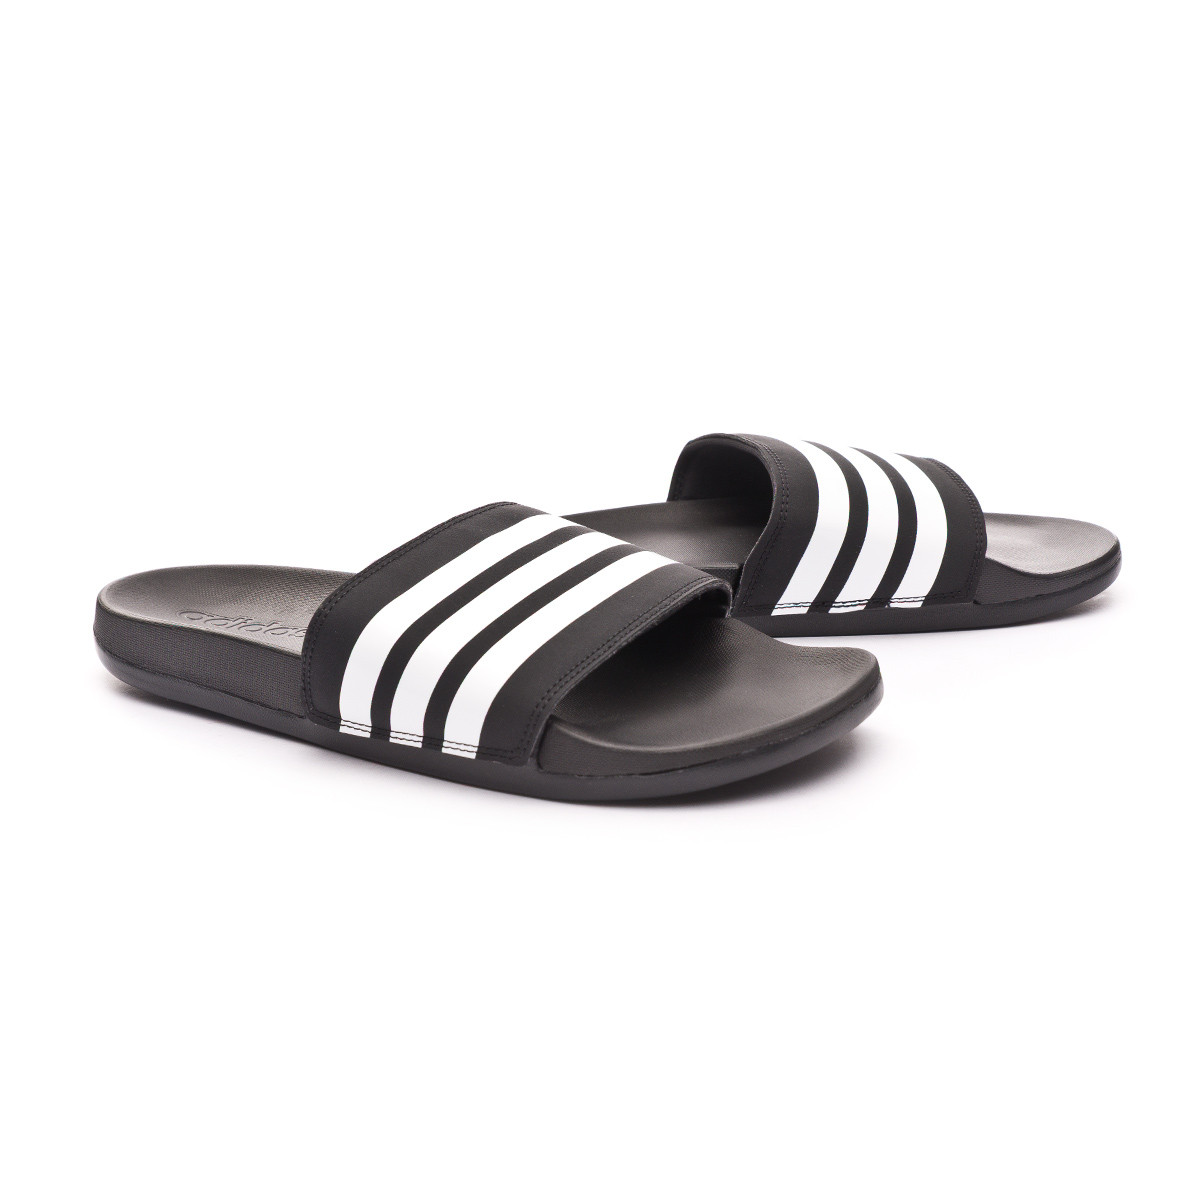 adidas flip flops with spikes